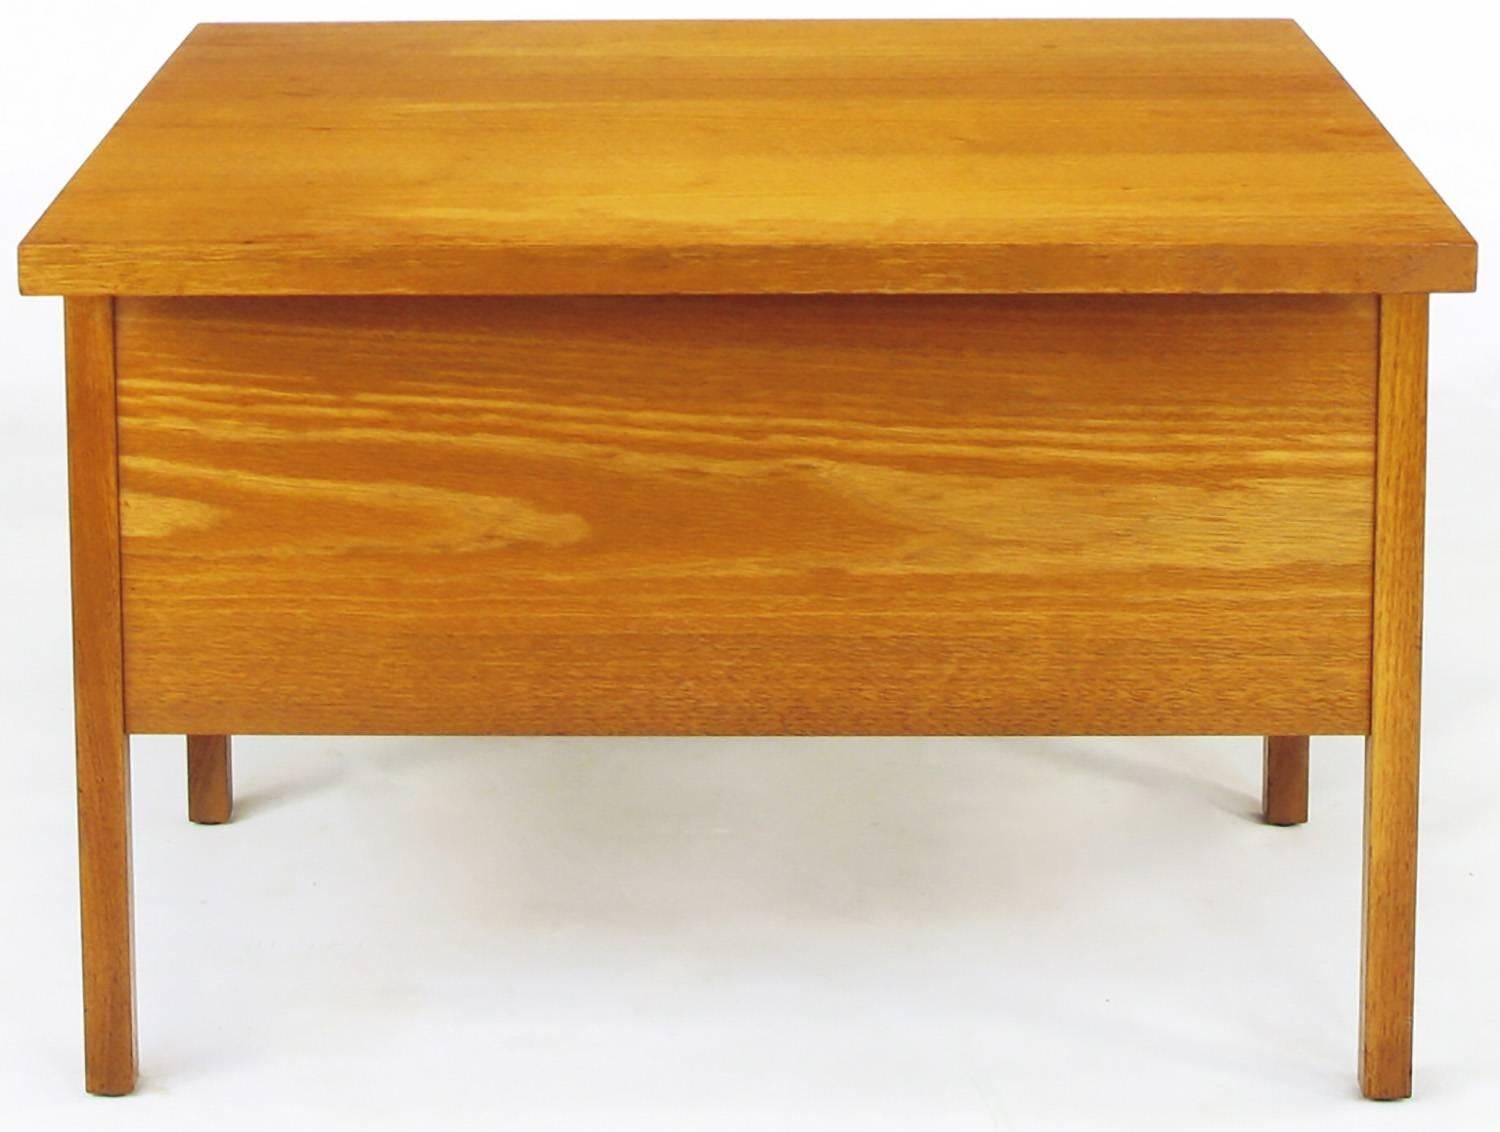 Mid-20th Century John Keal Walnut Coffee Table with Three Folding Side Tables For Sale